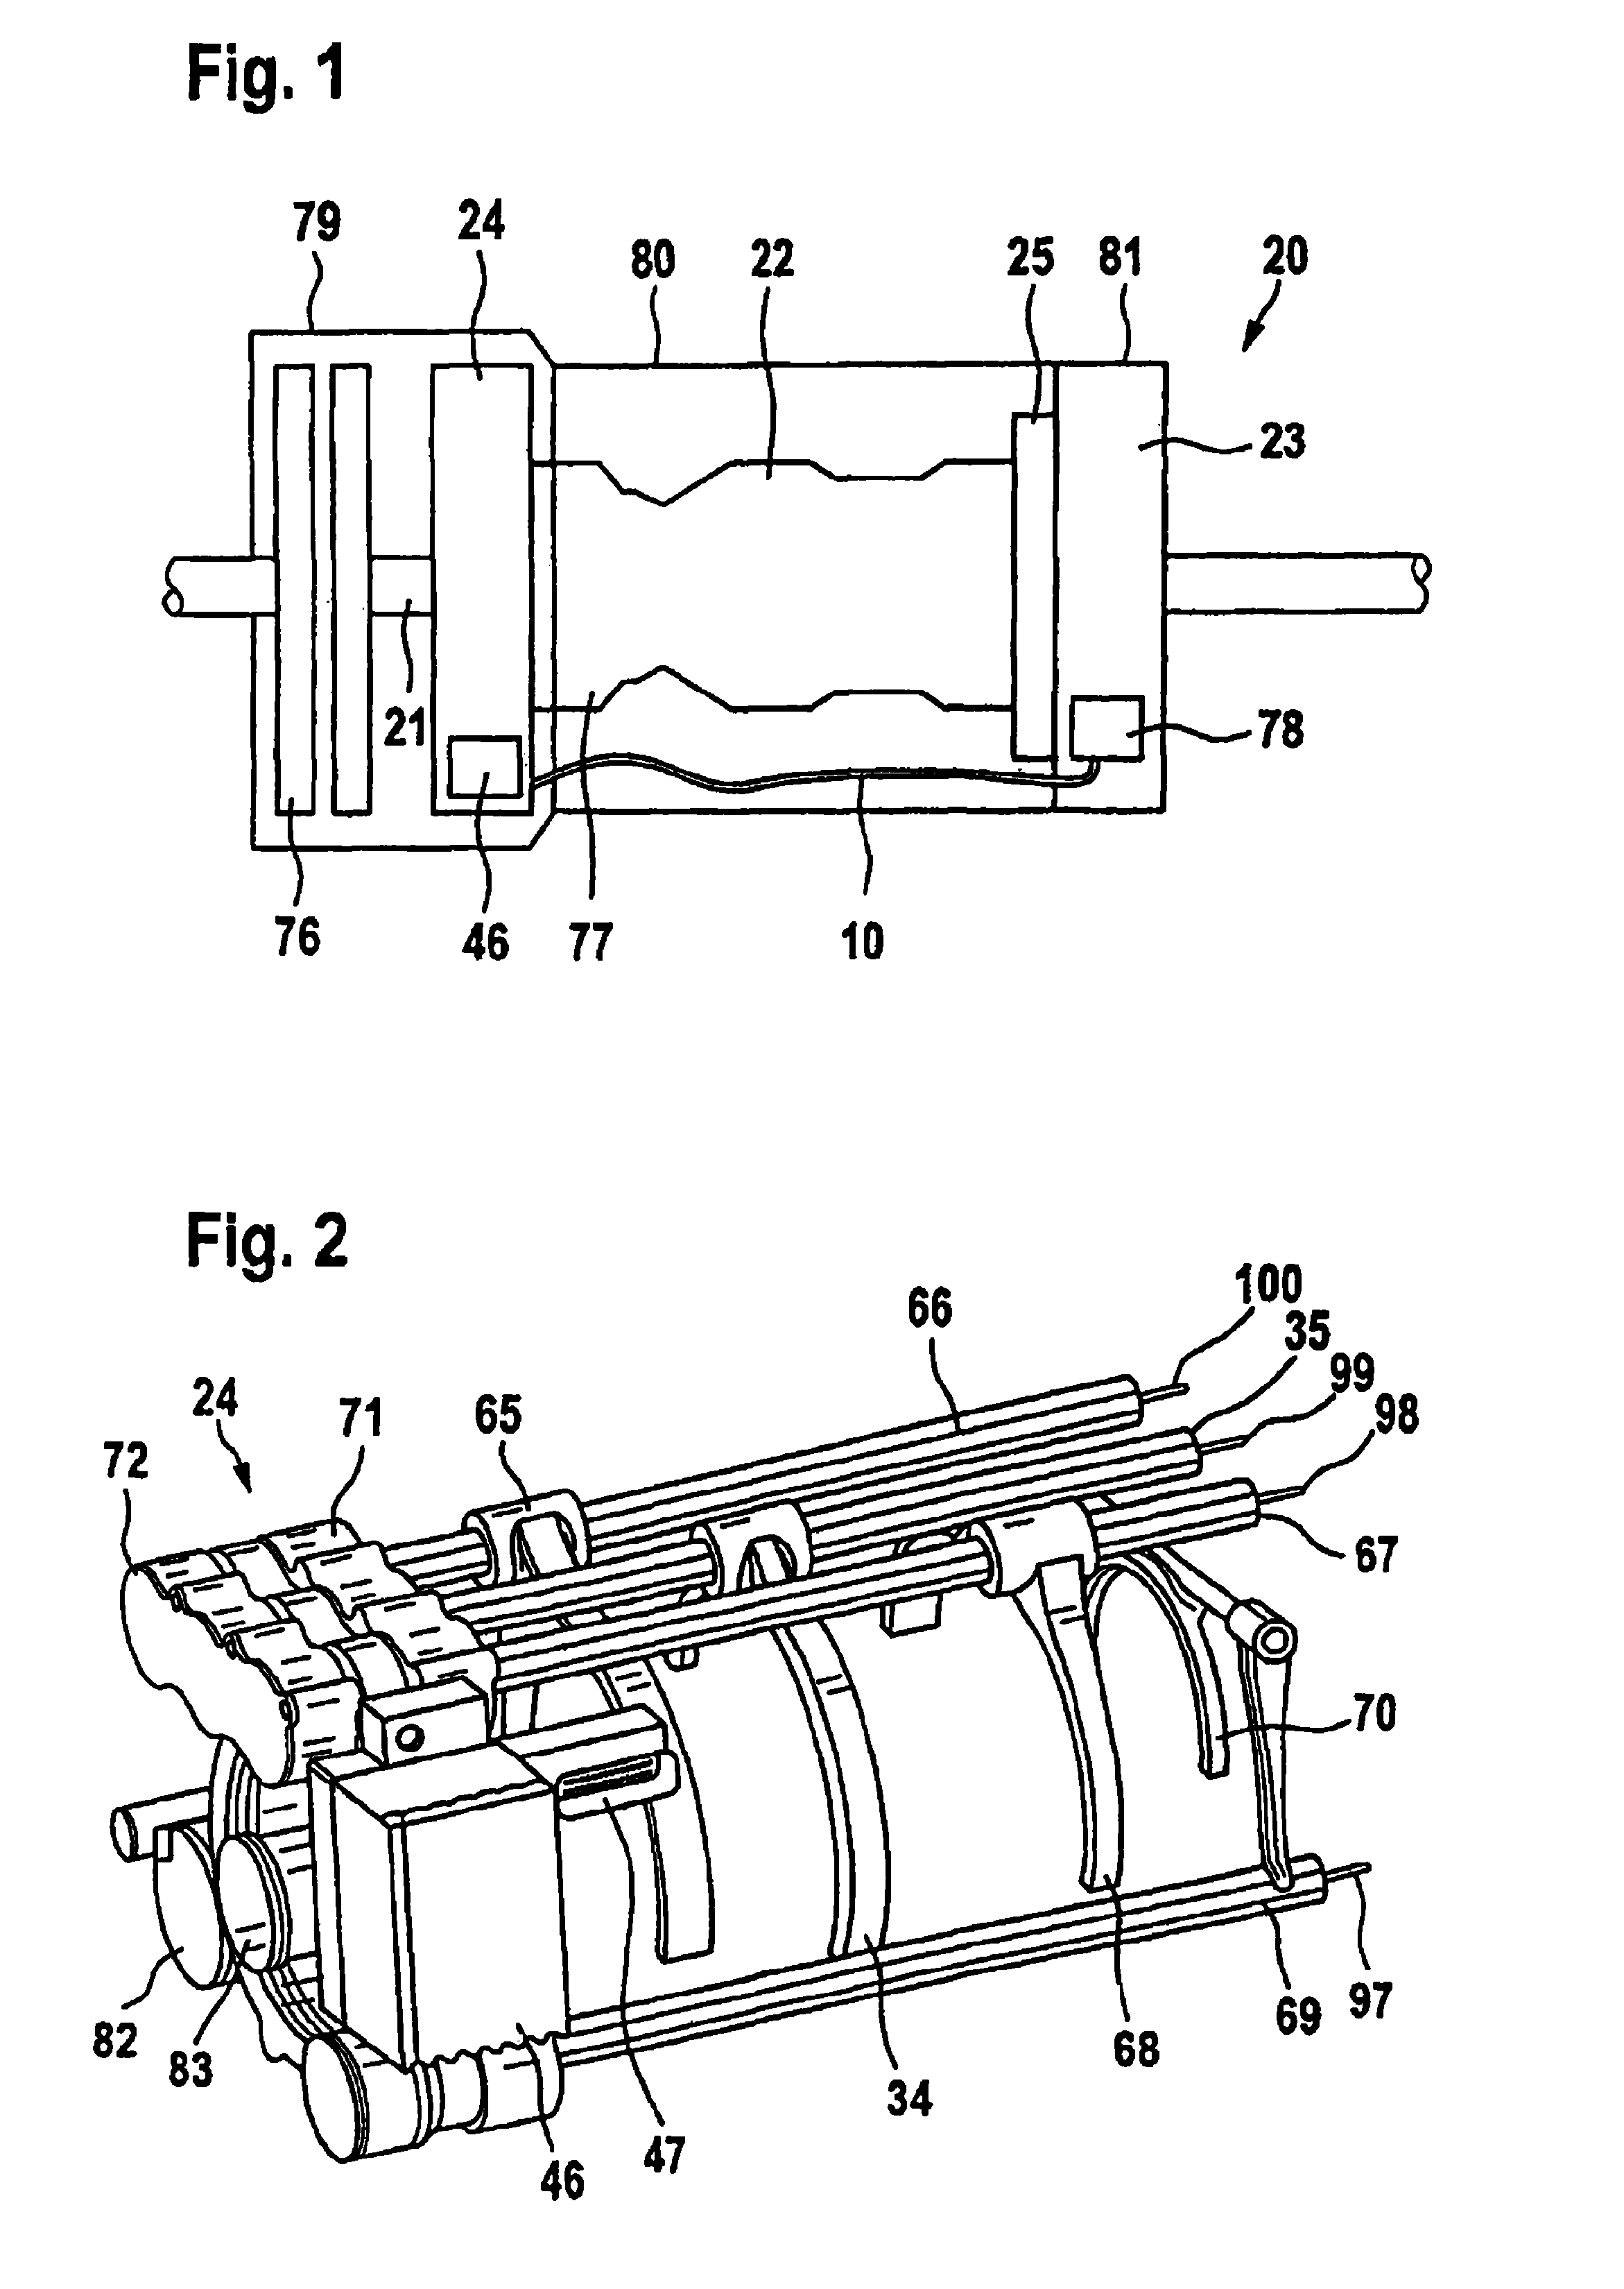 Gear shift module for an automatic transmission of a motor vehicle